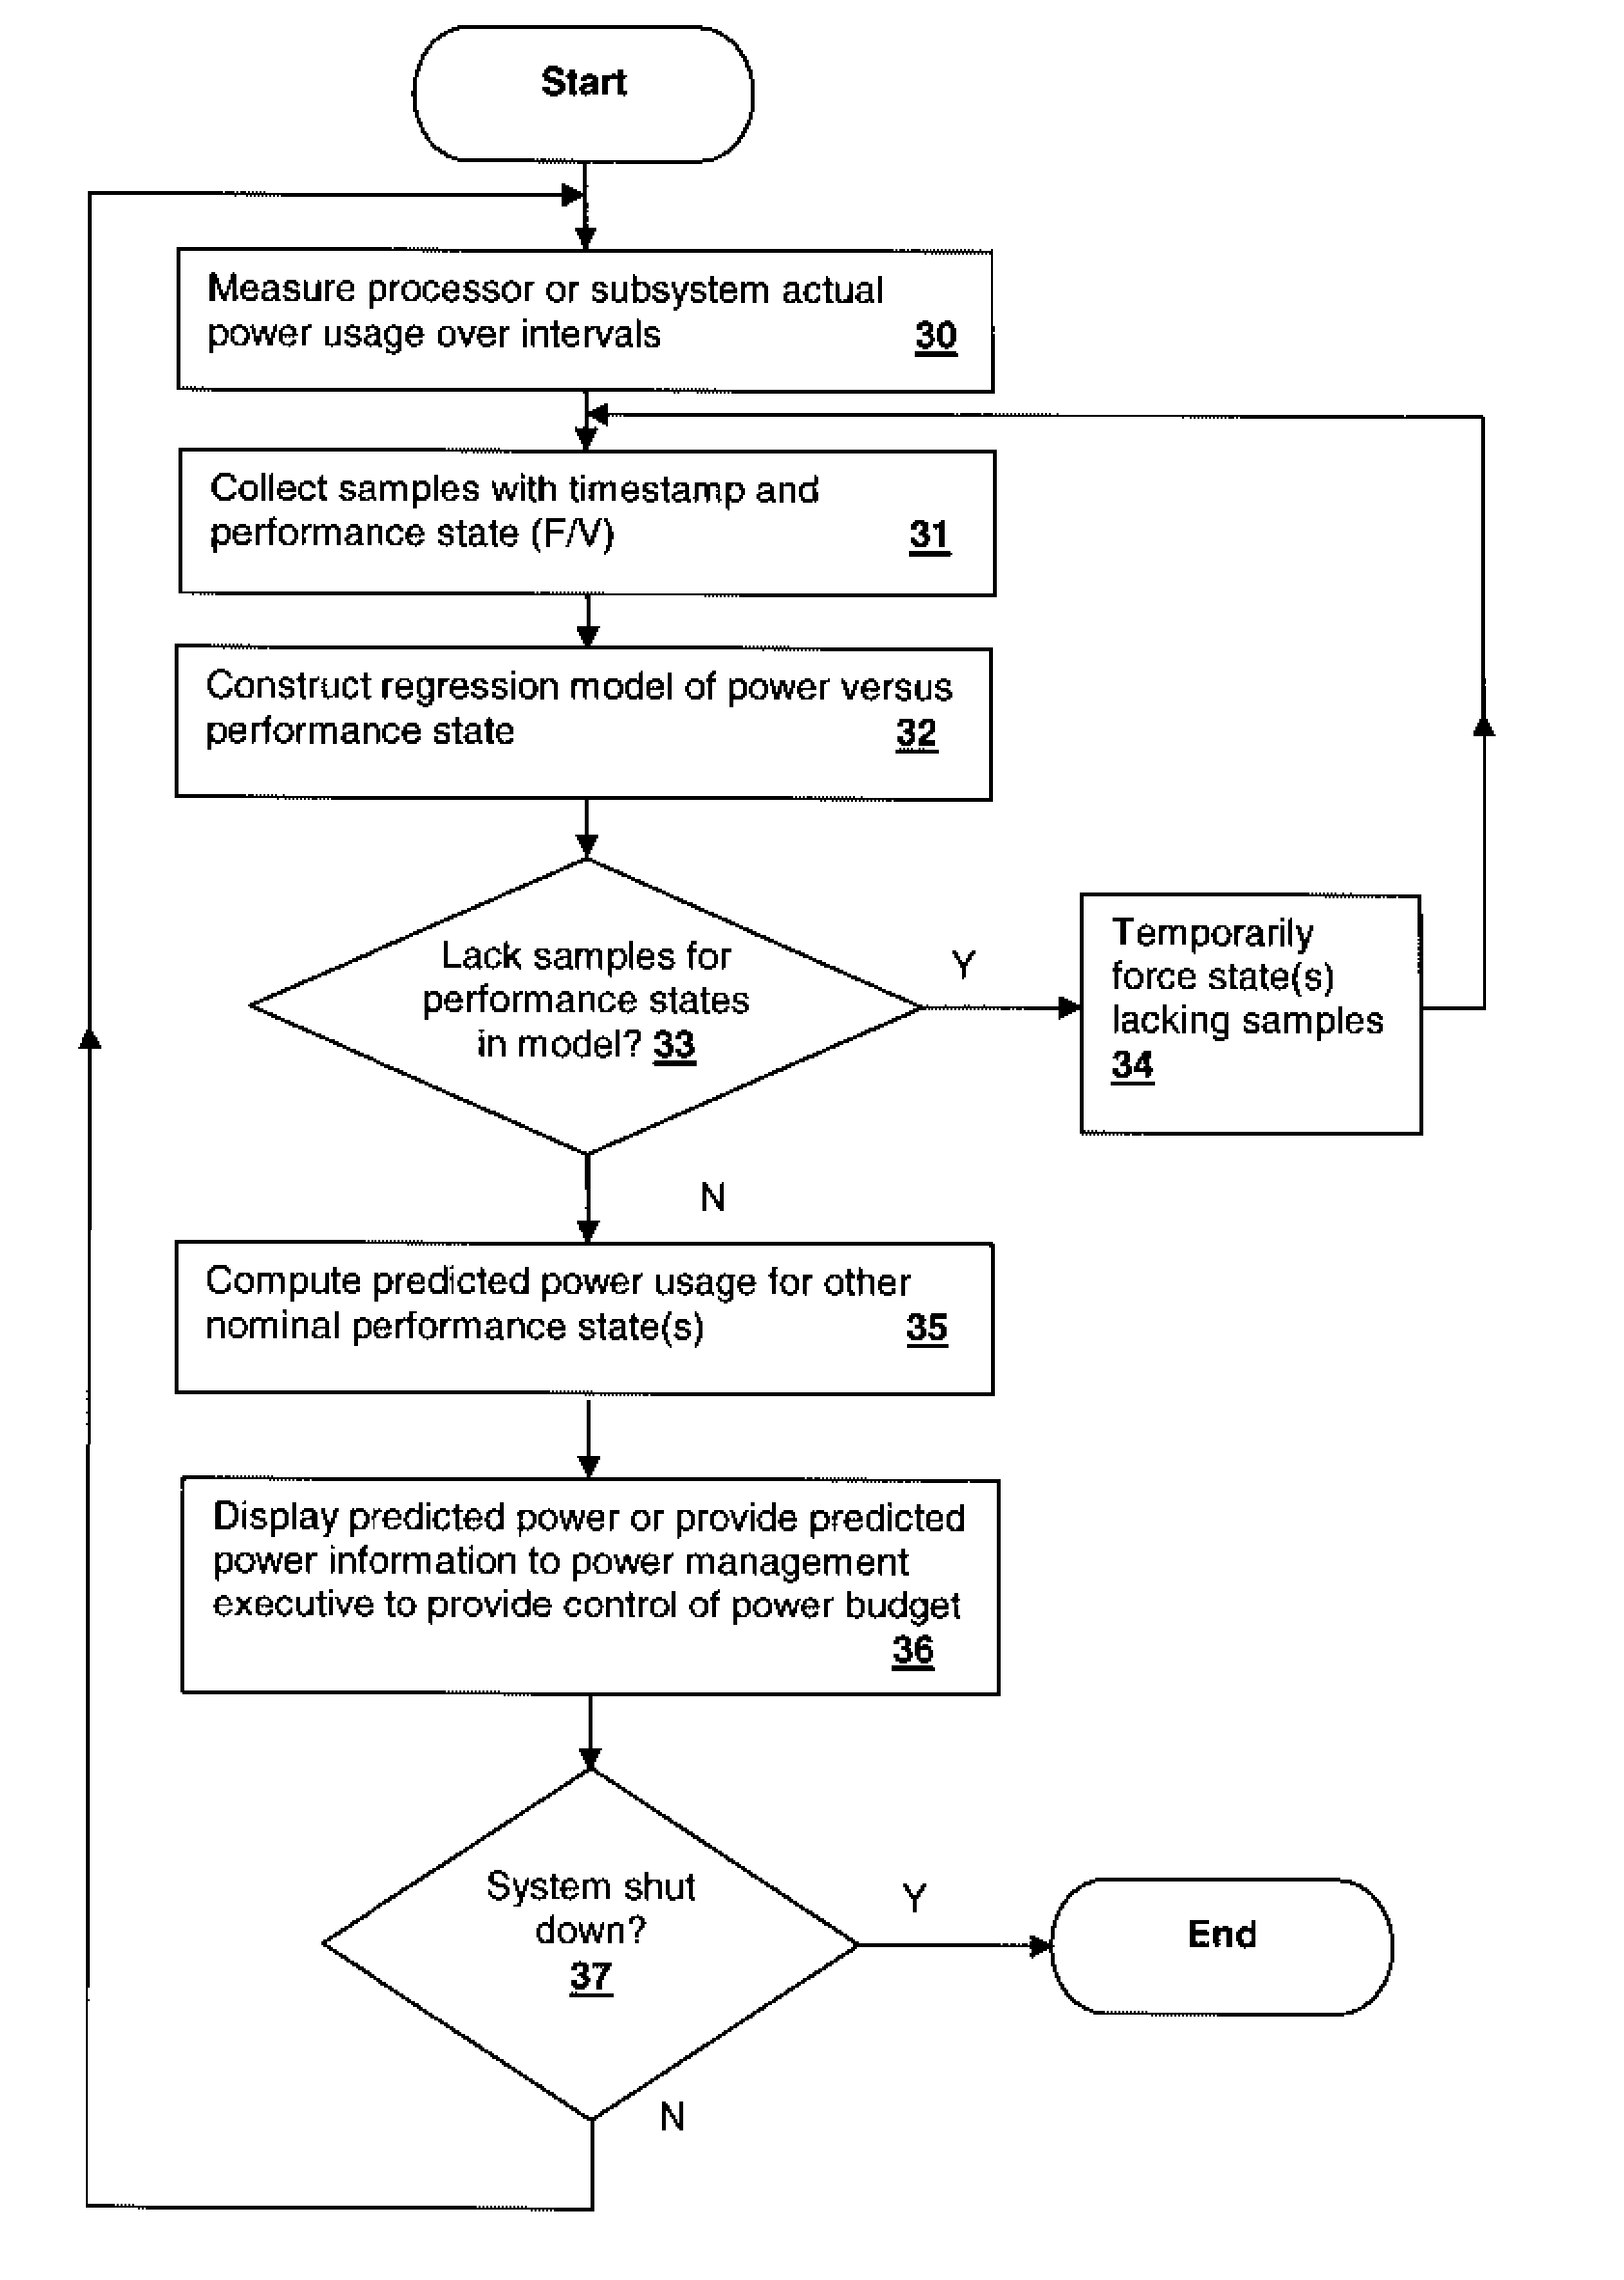 Method and system for real-time prediction of power usage for a change to another performance state